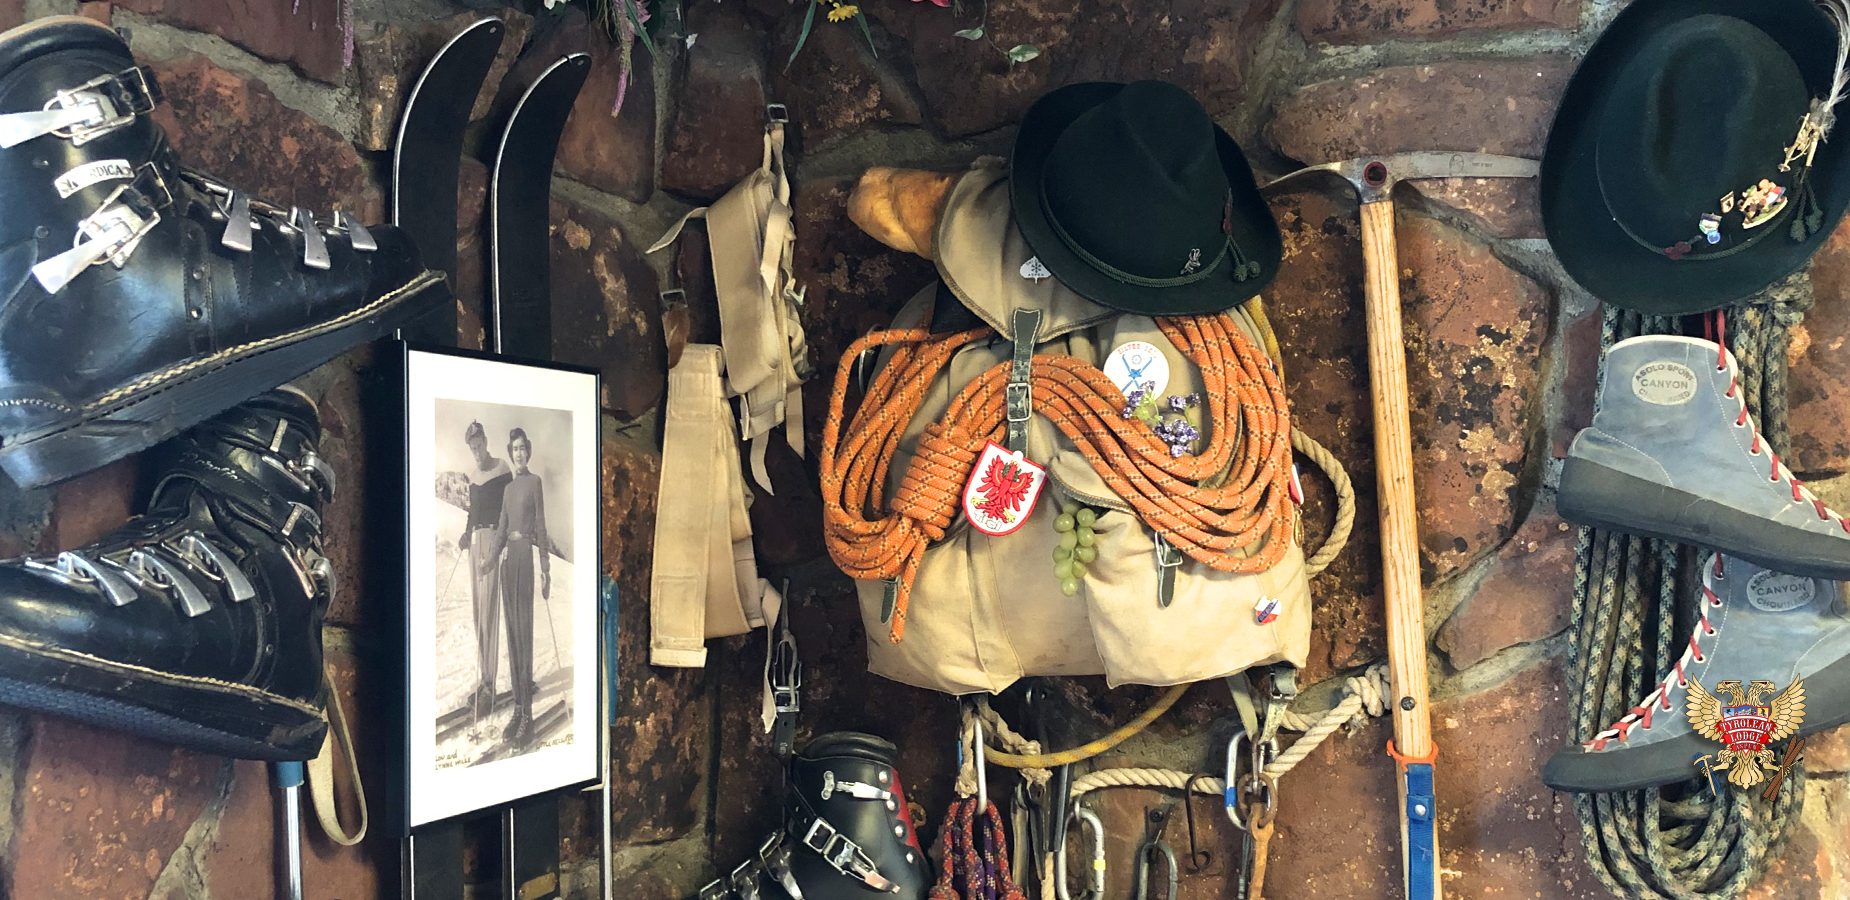 A living museum of ski and mountaineering gear adorn the office